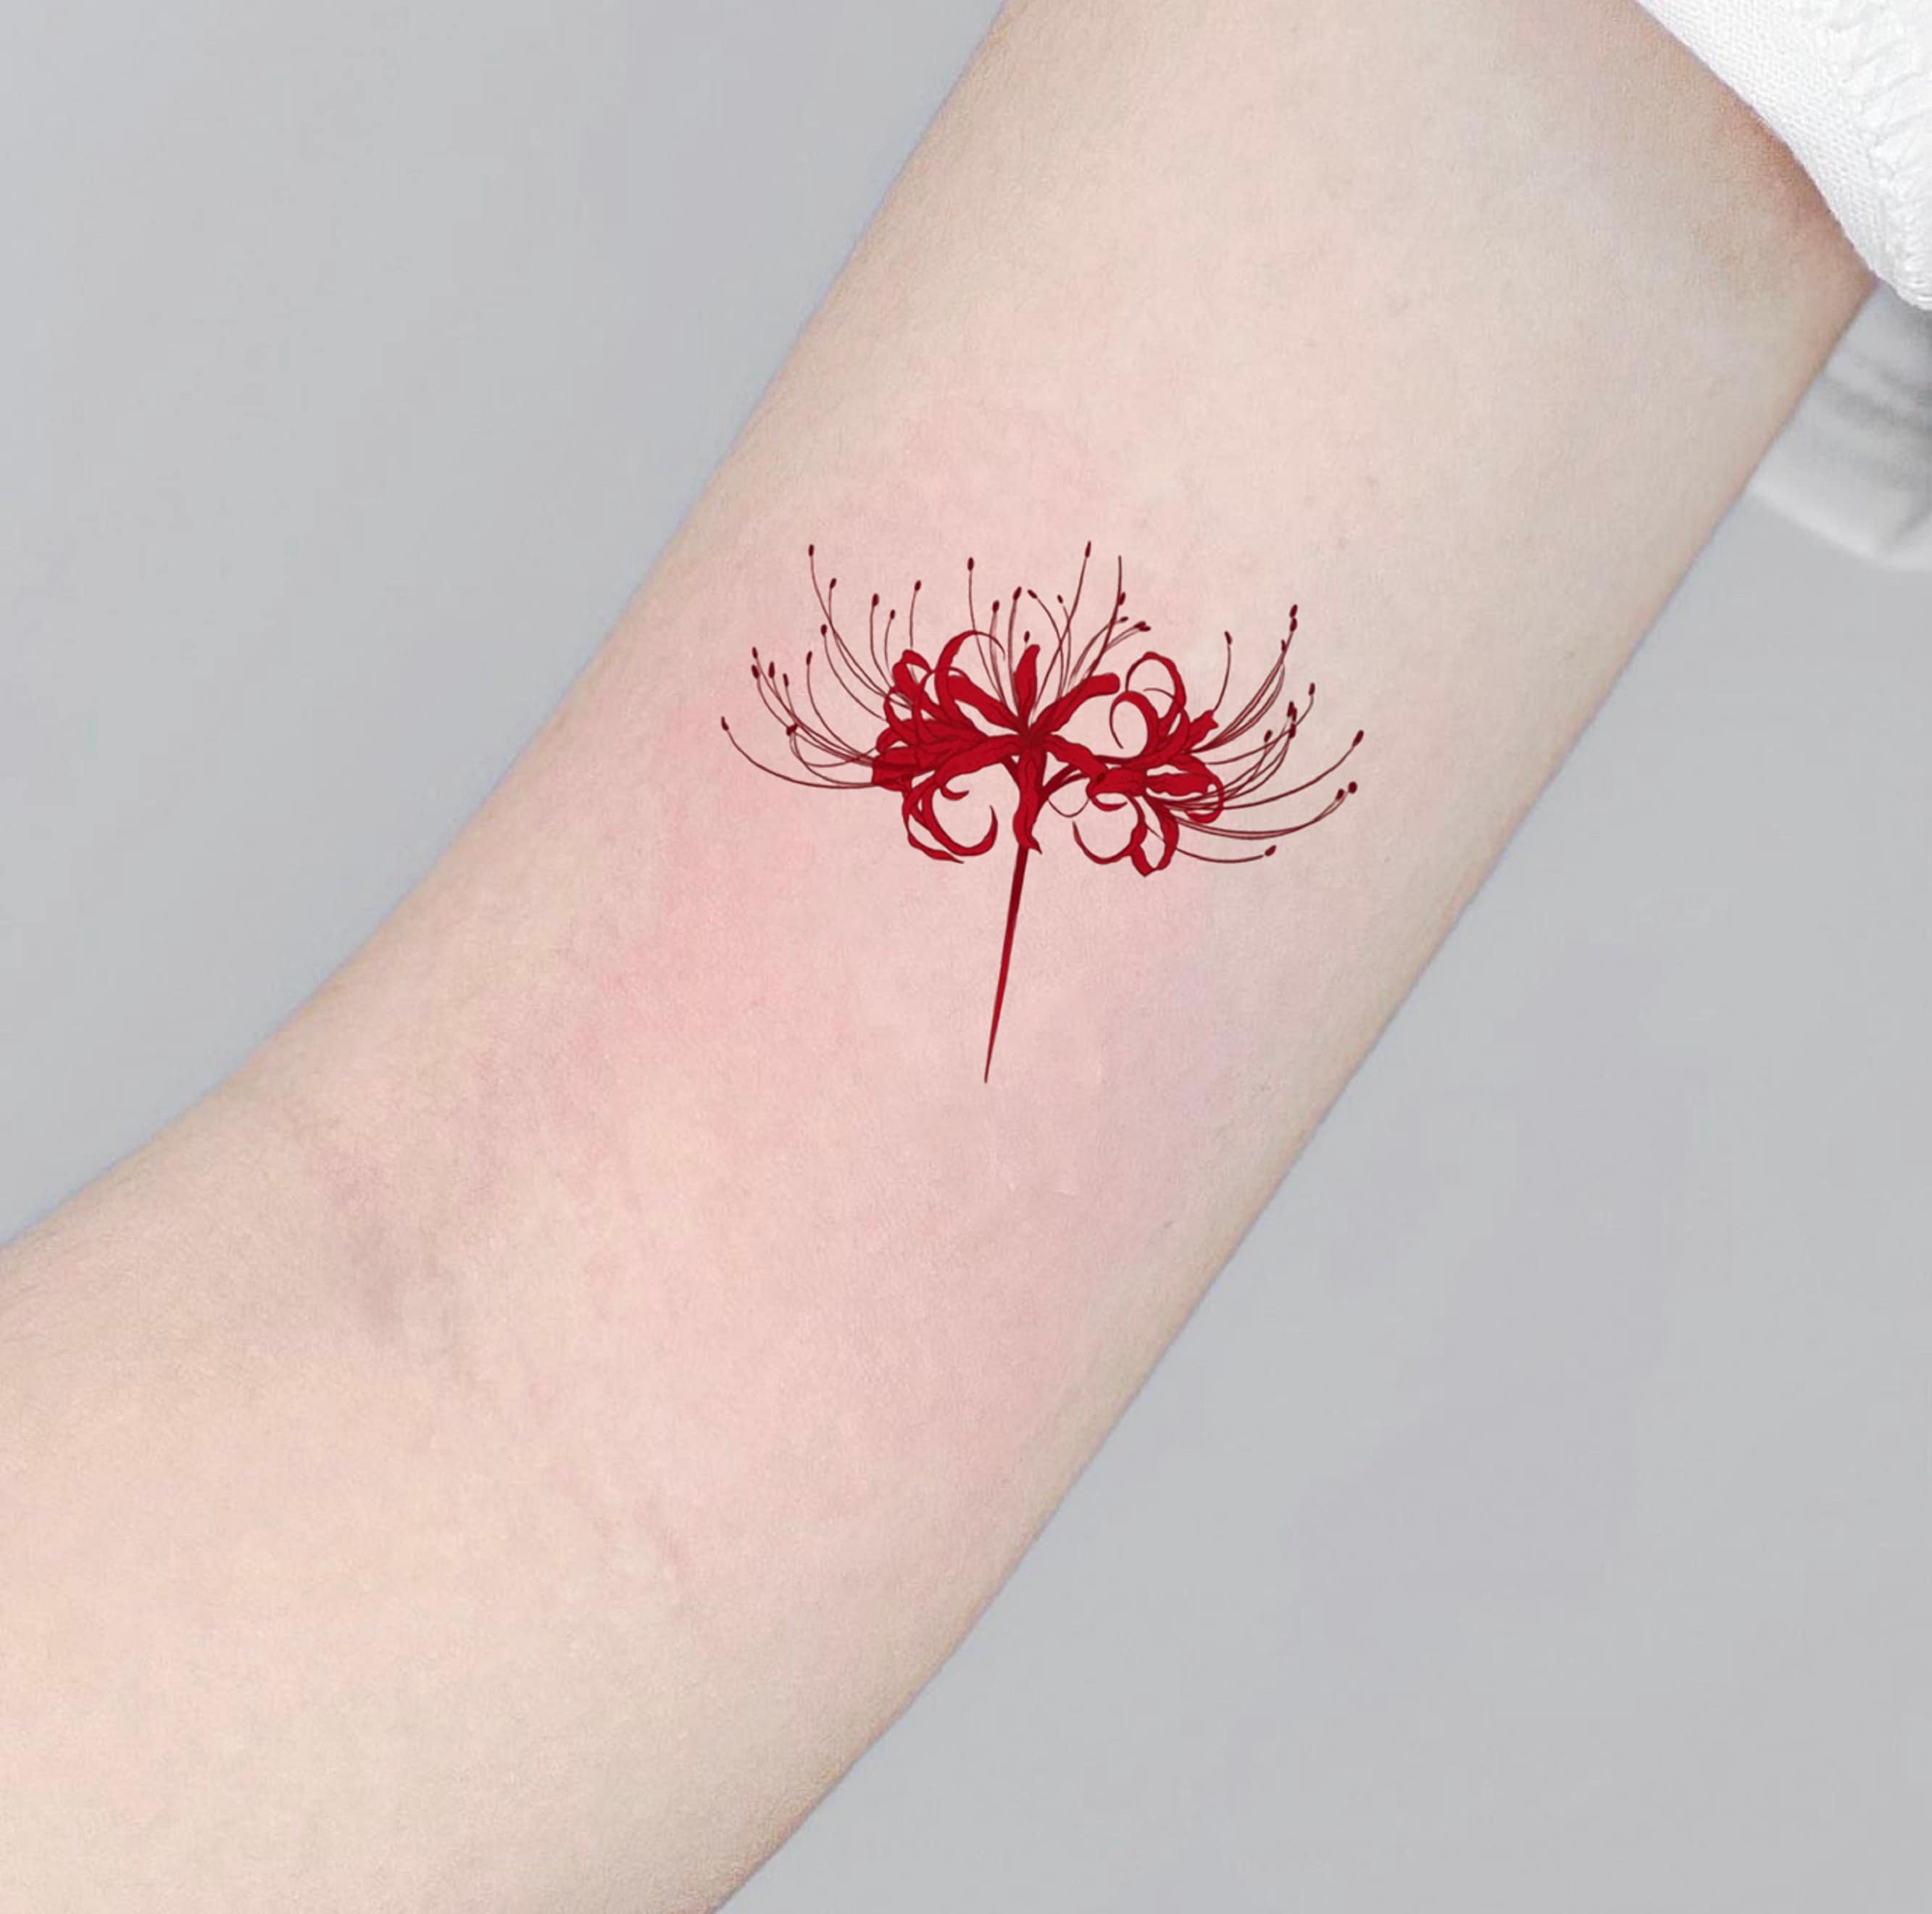 86 Top Spider Tattoos Ideas for Men and Women 